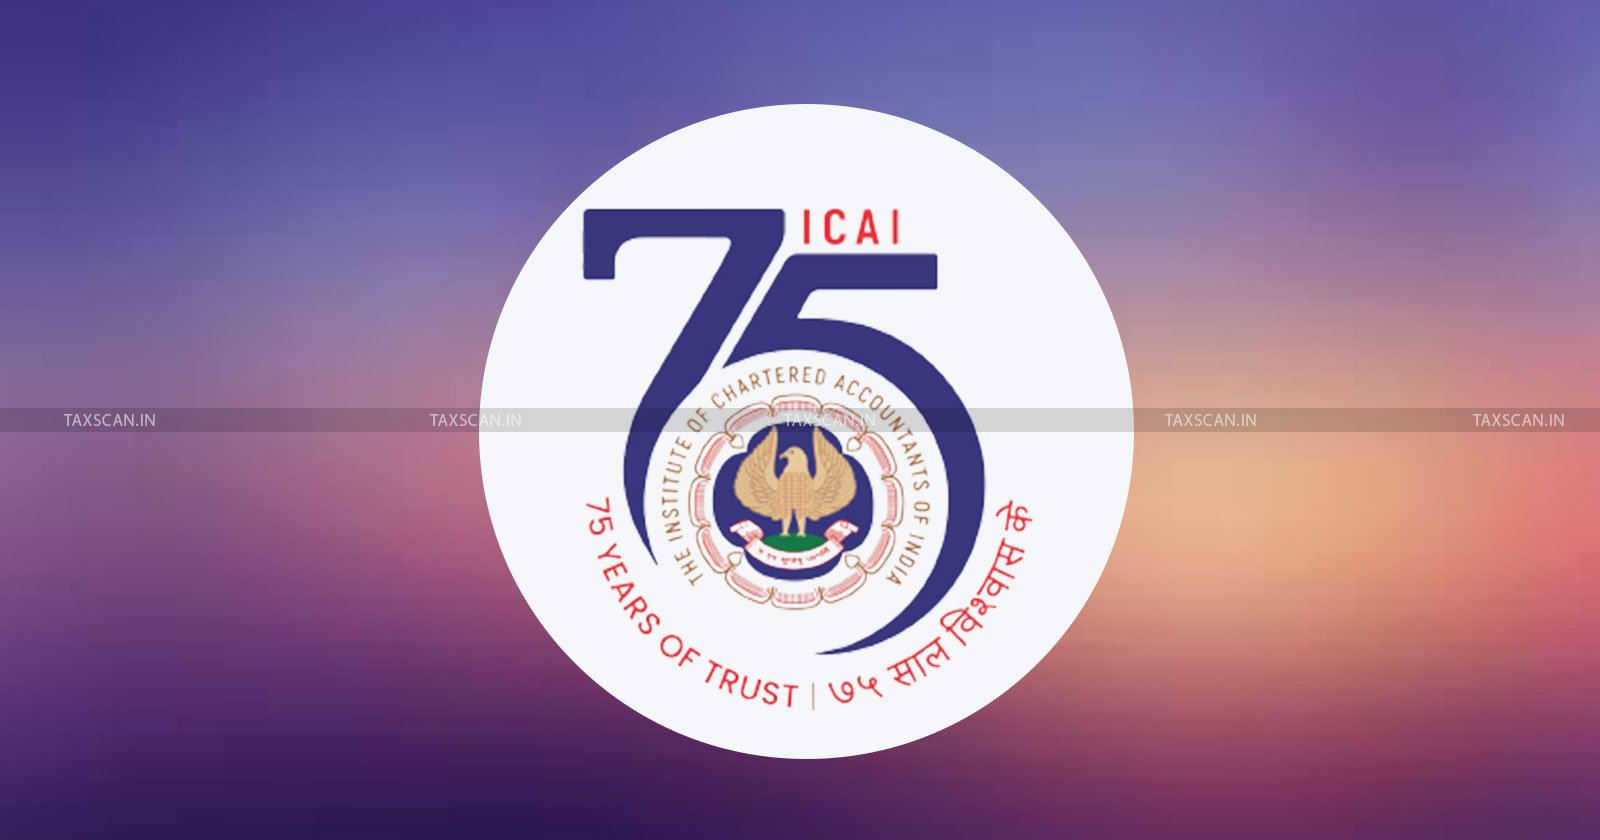 ICAI Introduces New Logo to Celebrate Start of 75th Year on Eve of CA Day